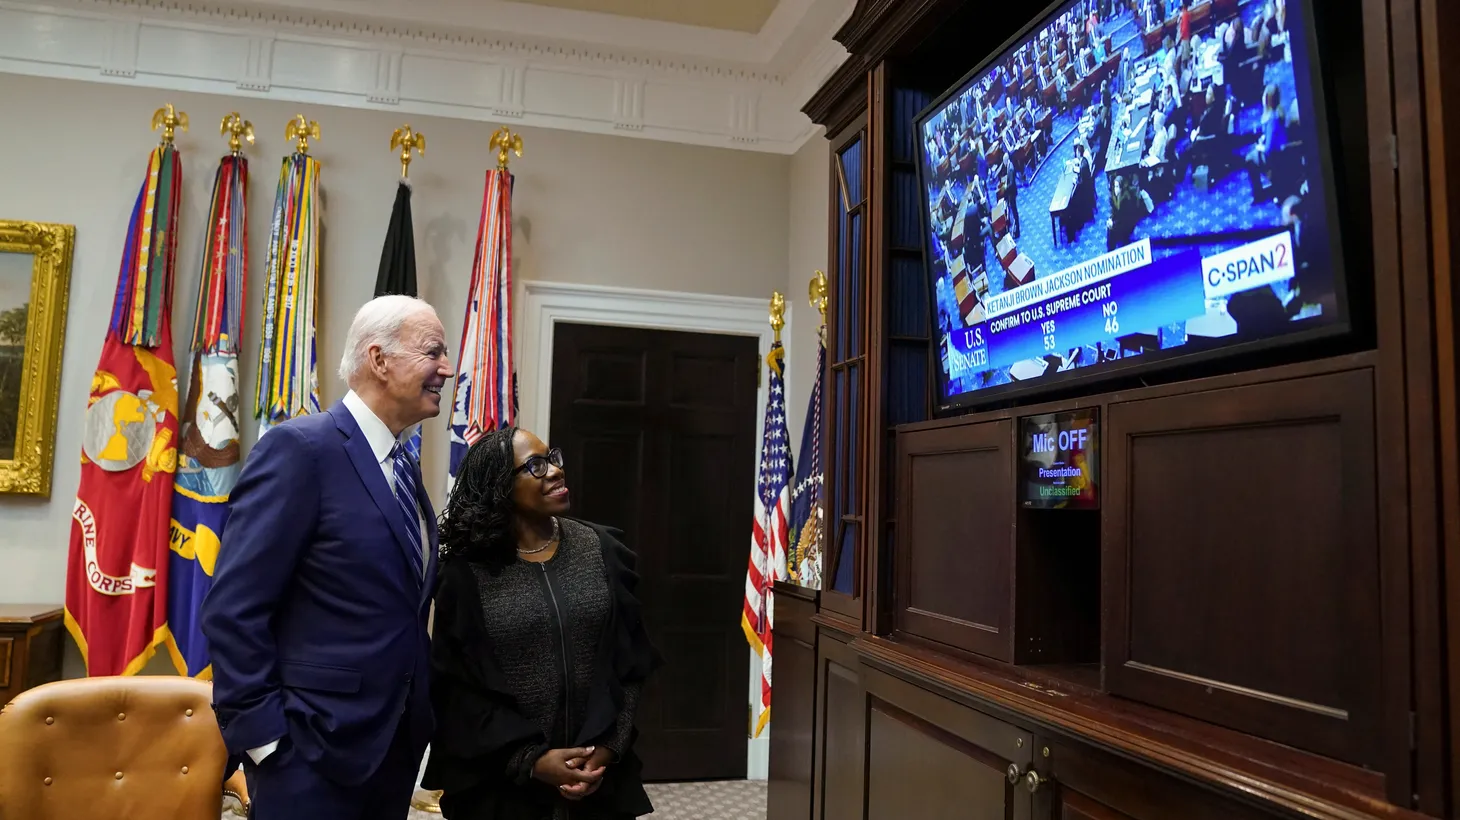 U.S. President Joe Biden and Supreme Court nominee Judge Ketanji Brown Jackson watch as the full U.S. Senate votes to confirm Jackson as the first Black woman to serve on the U.S. Supreme Court in Washington on Apr. 7, 2022.